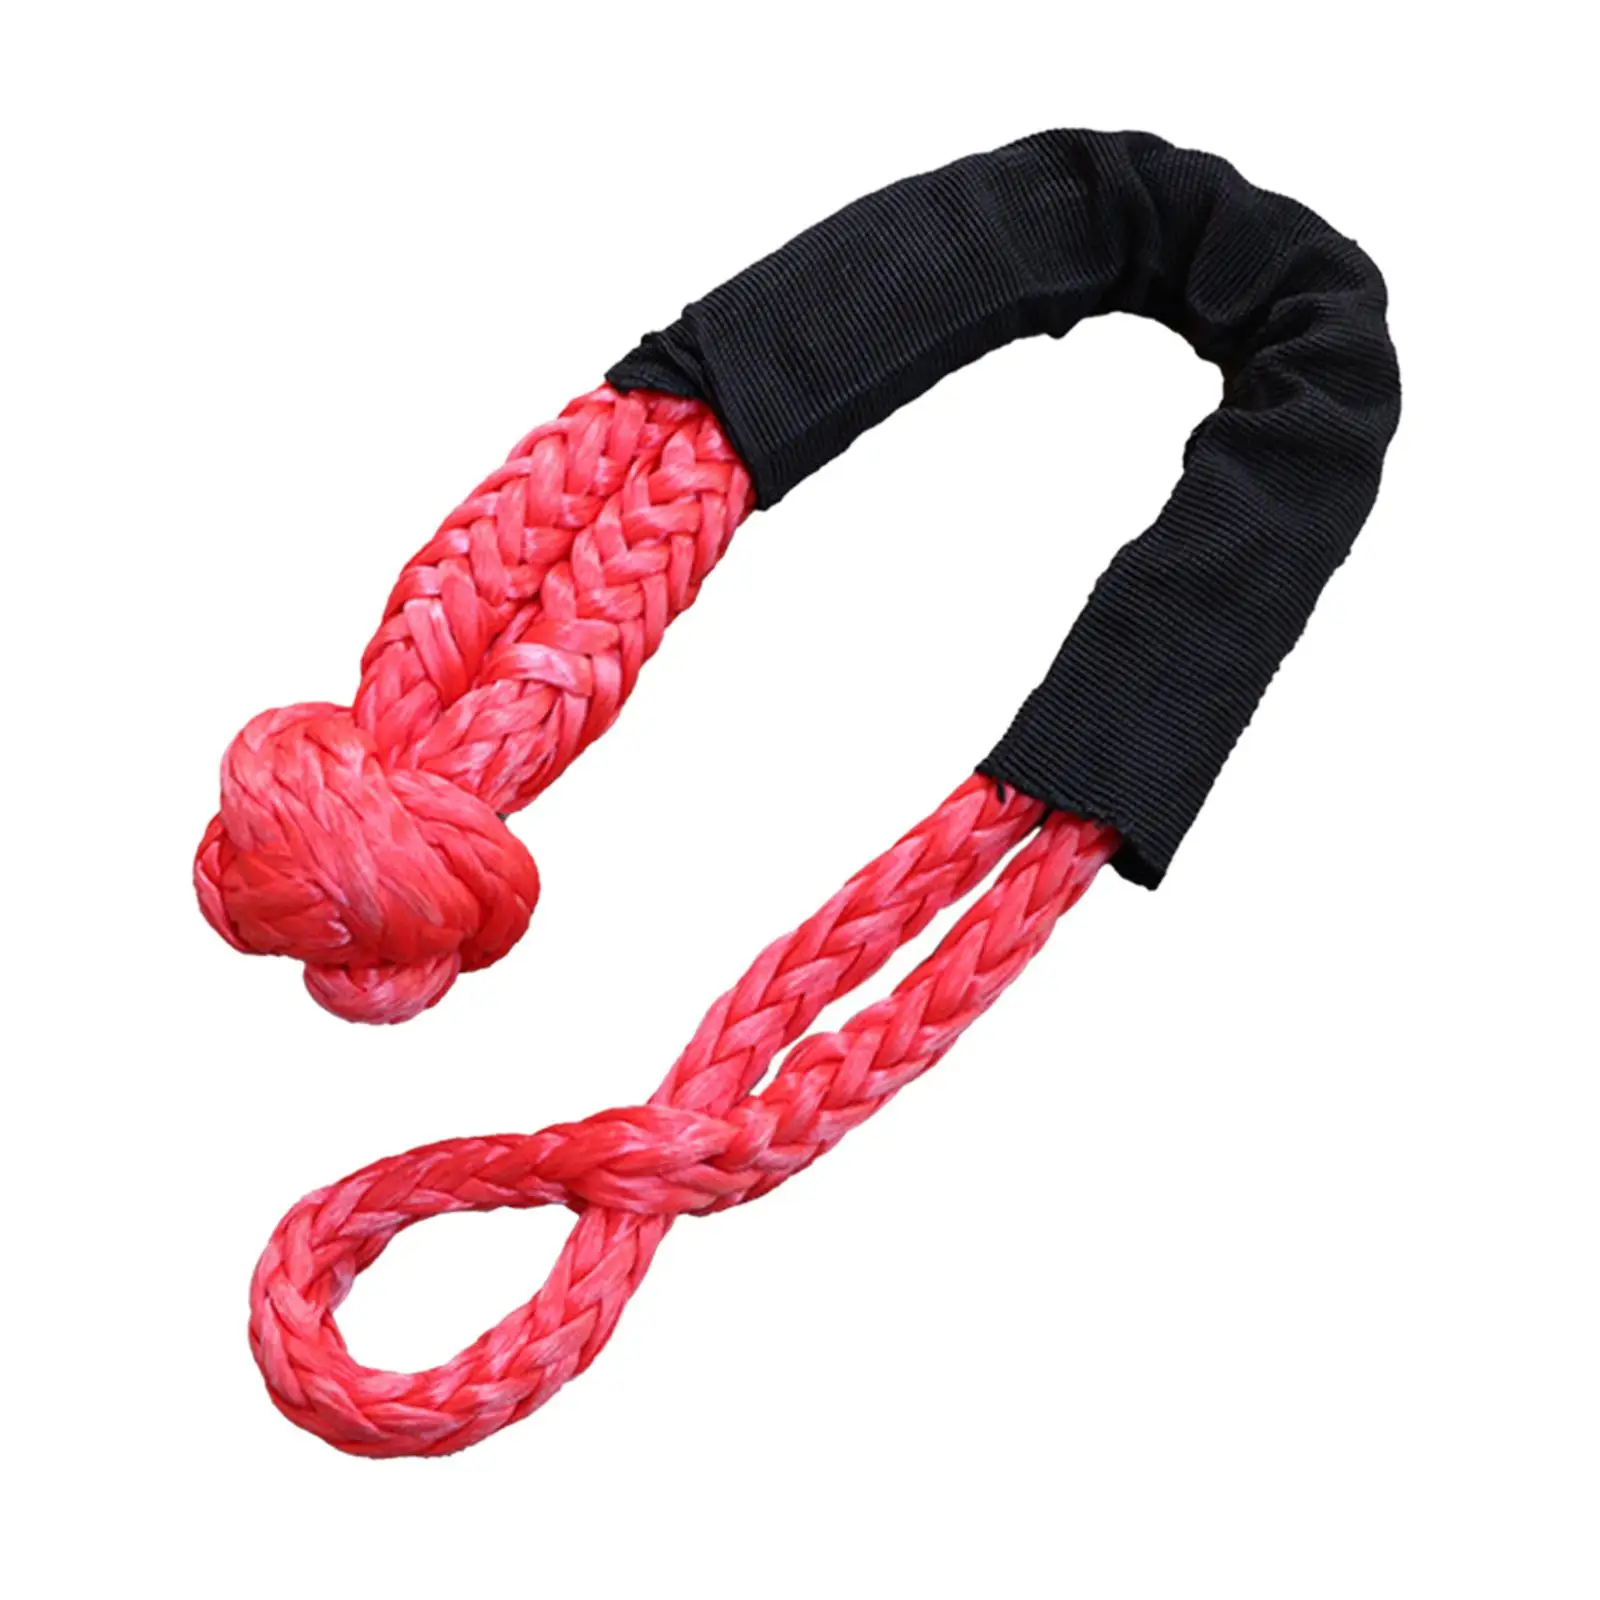 Soft Shackle Auto Accessories Durable Car Breakdowns Versatile Towing Rope for SUV Towing Sailing Trucks ATV UTV